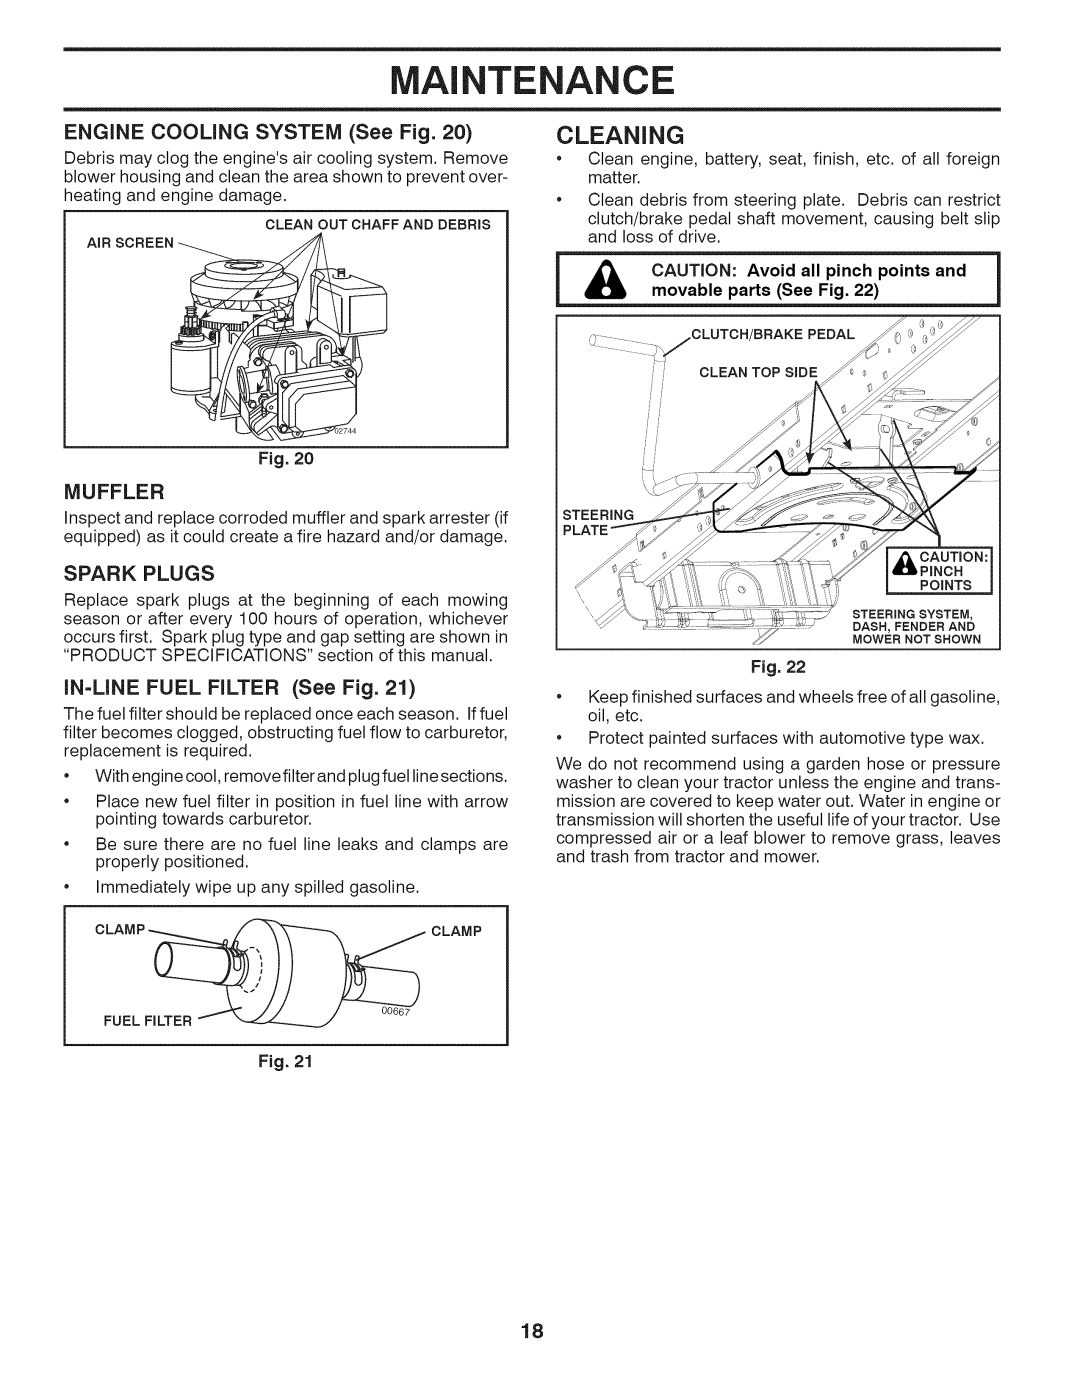 Husqvarna LTH18538 owner manual Cleaning, iAO O OO: voOi, Maintenance, ENGINE COOLING SYSTEM See Fig, Muffler, Spark Plugs 